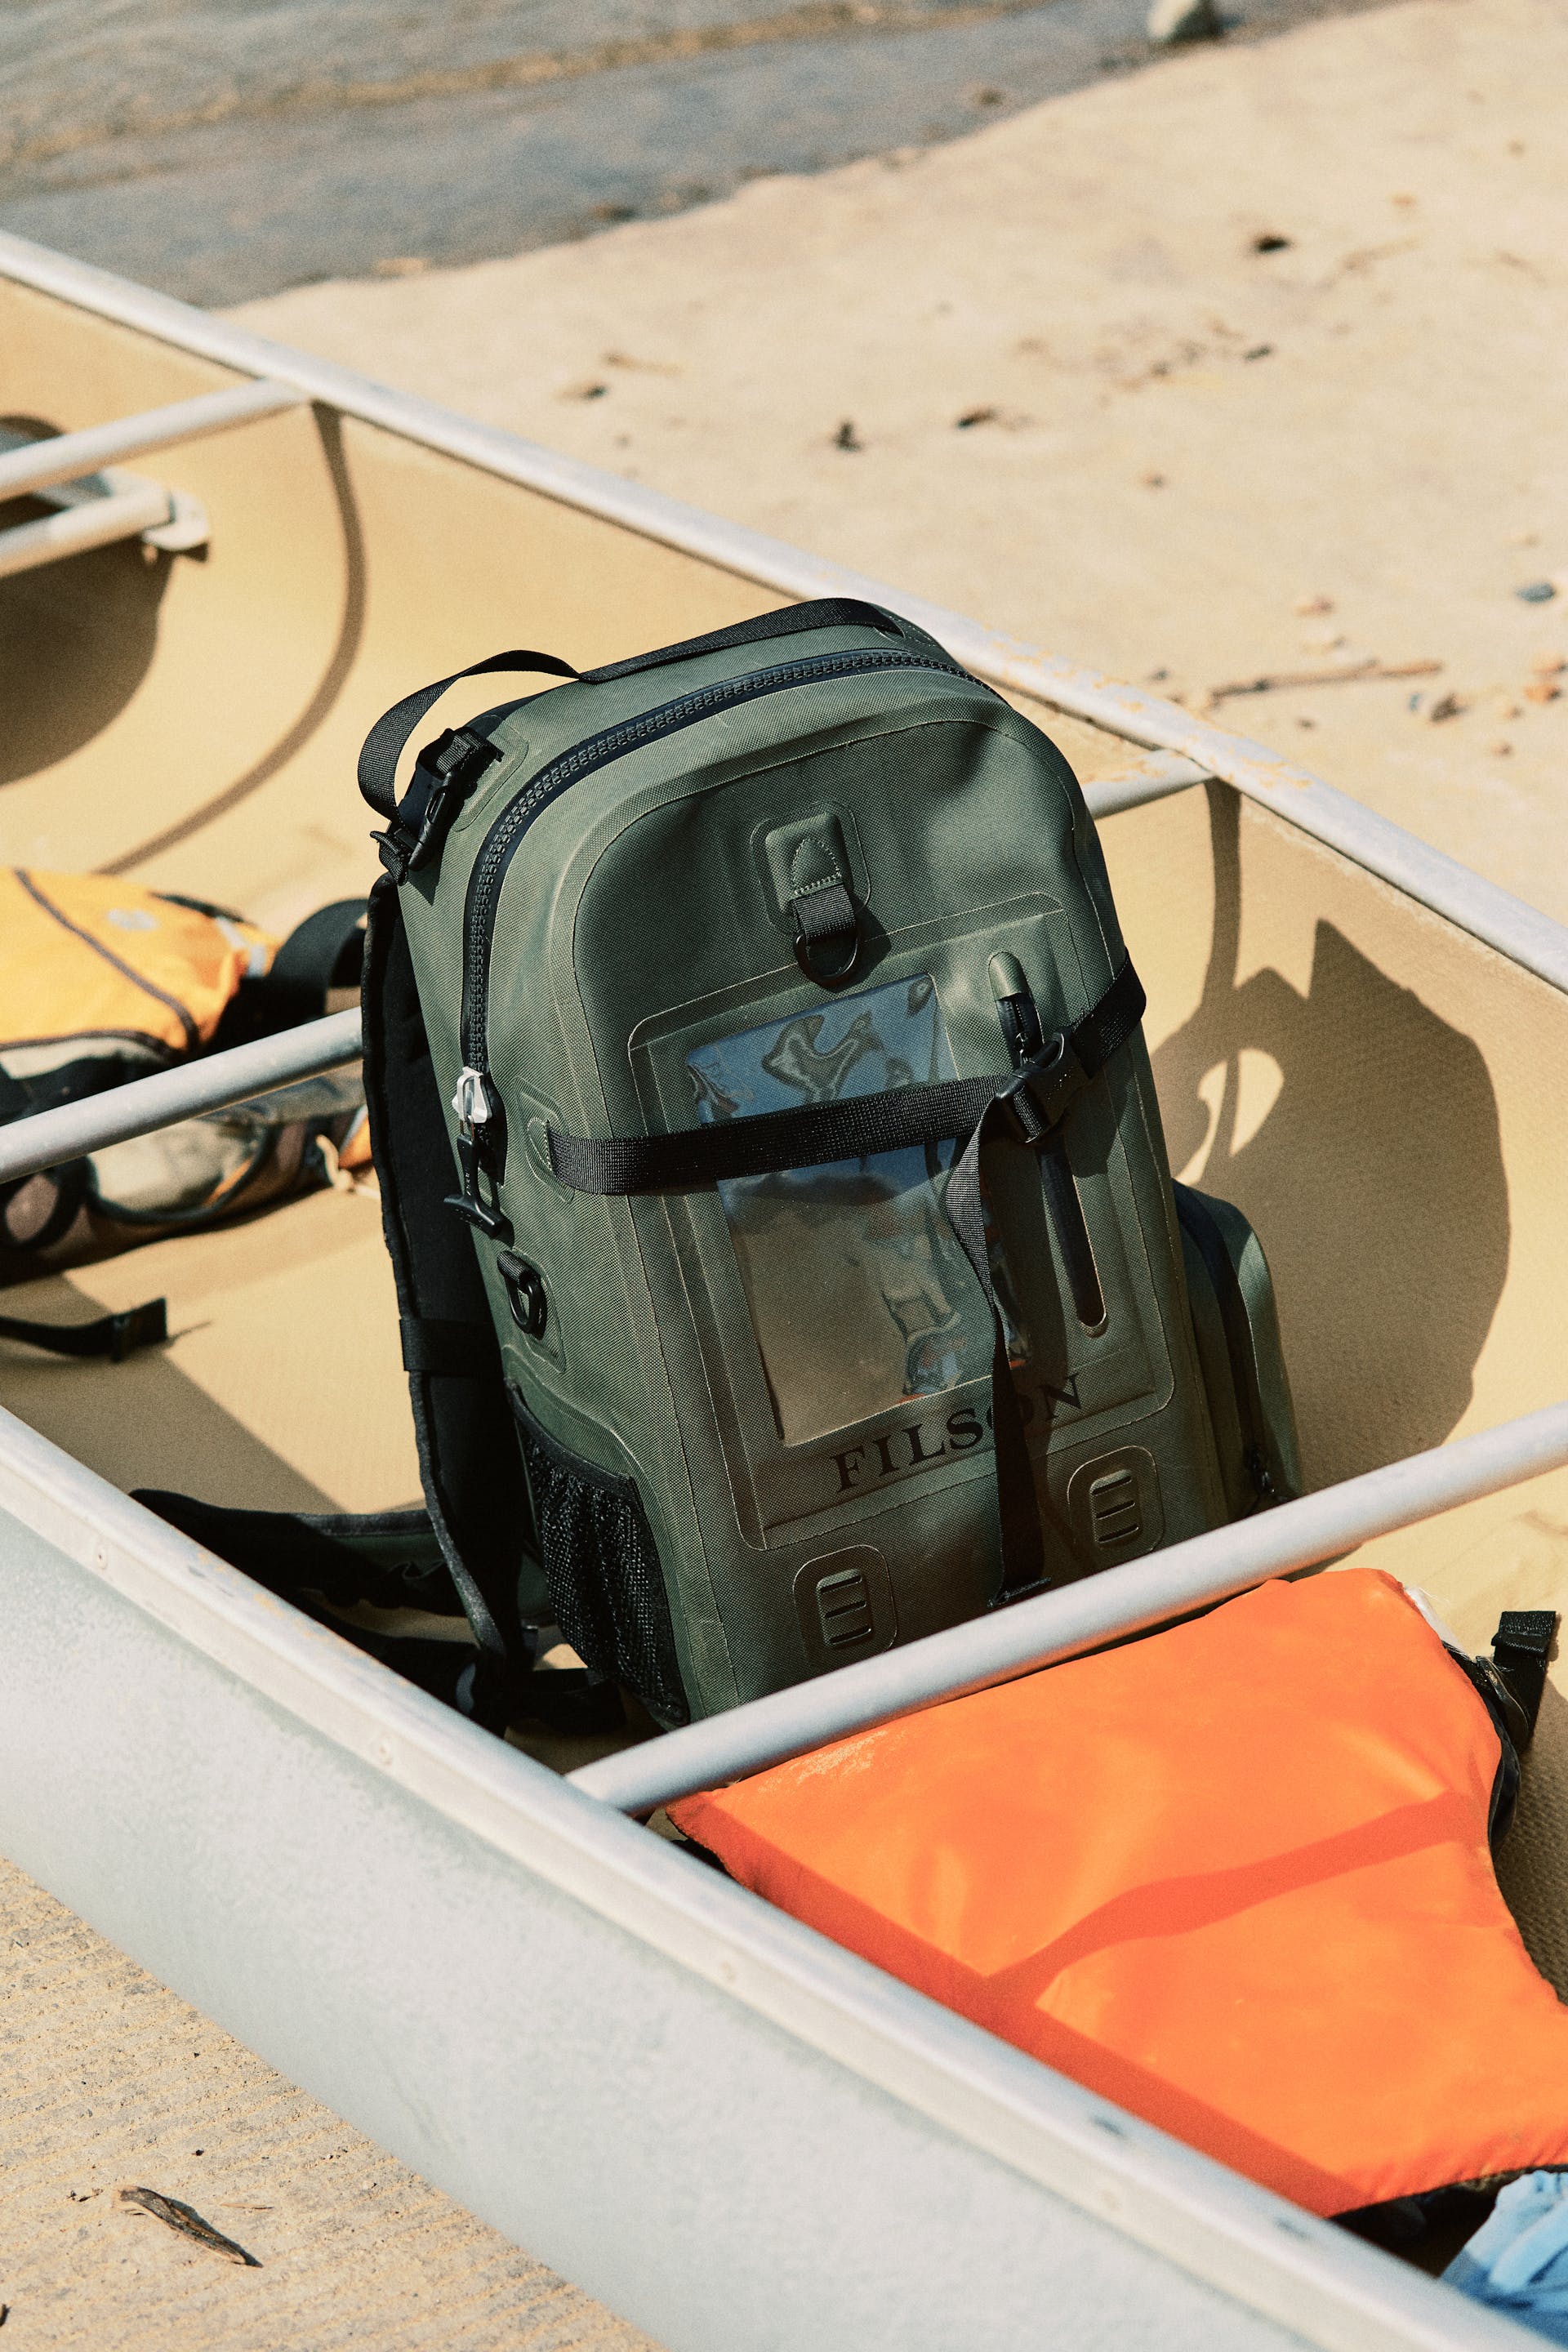 Filson Backpack Dry Bag in green sitting in a canoe on the shore of a lake